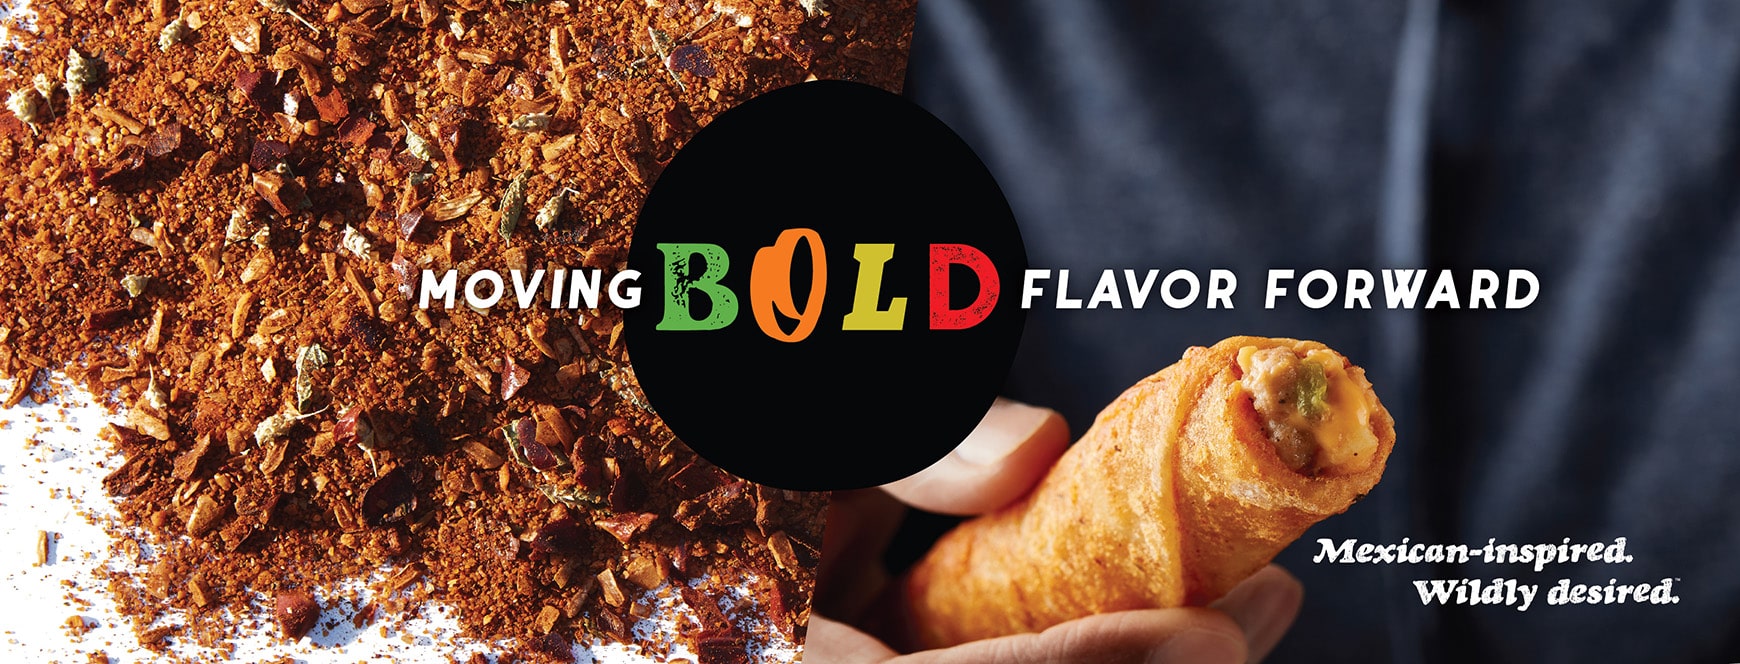 Moving BOLD flavor forward; Mexican-inspired. Wildly Desired; a pile of spices next to a hand holding a cheese and meat-stuffed Tornados taquito with the text